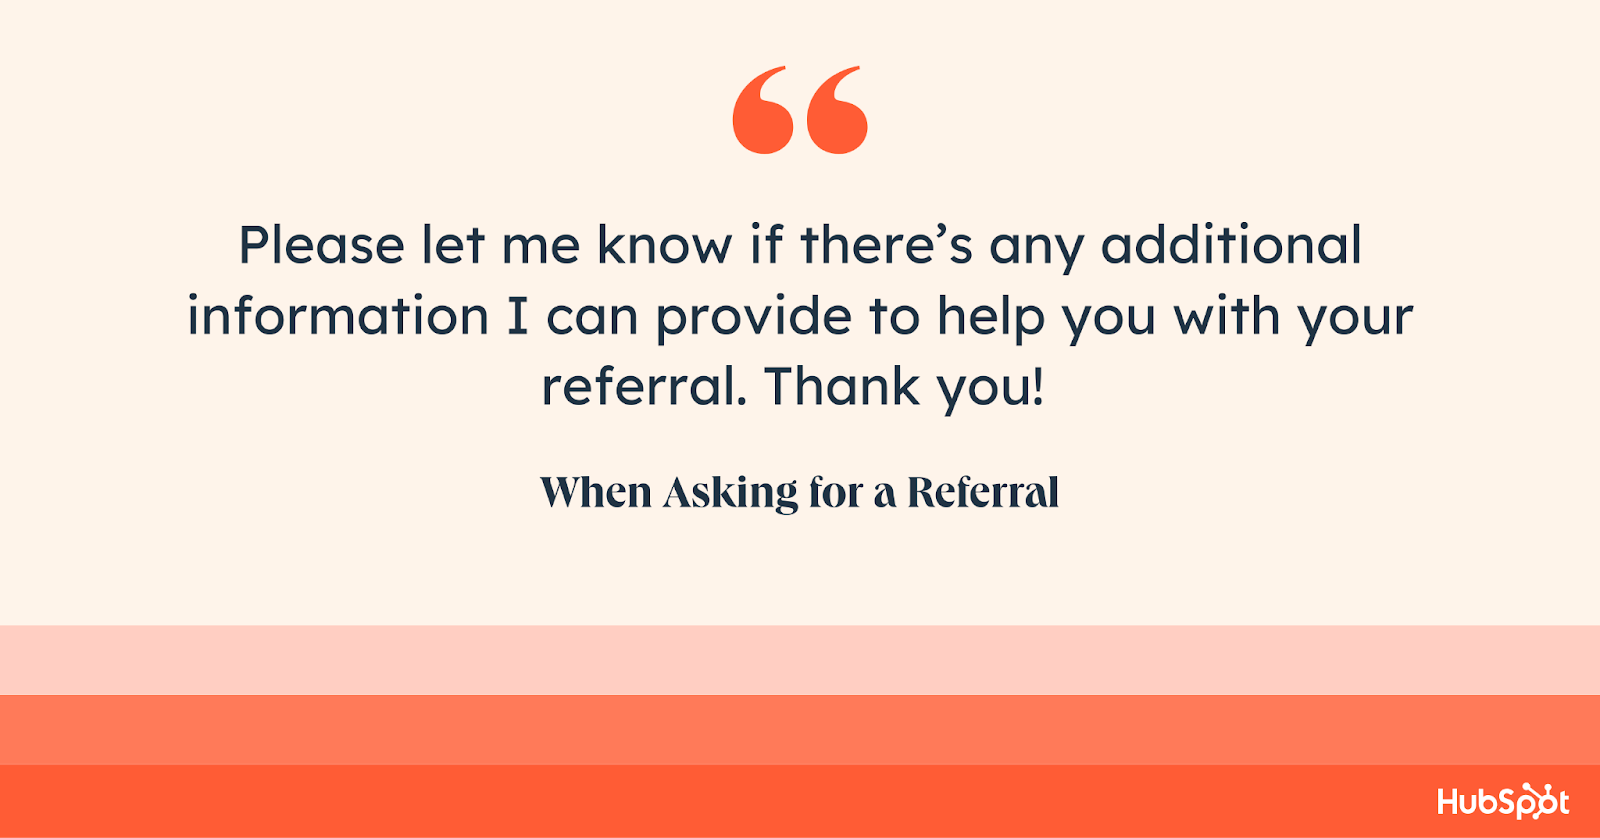 how to end an email when asking for a referral. Please let me know if there’s any additional information I can provide to help you with your referral. Thank you!